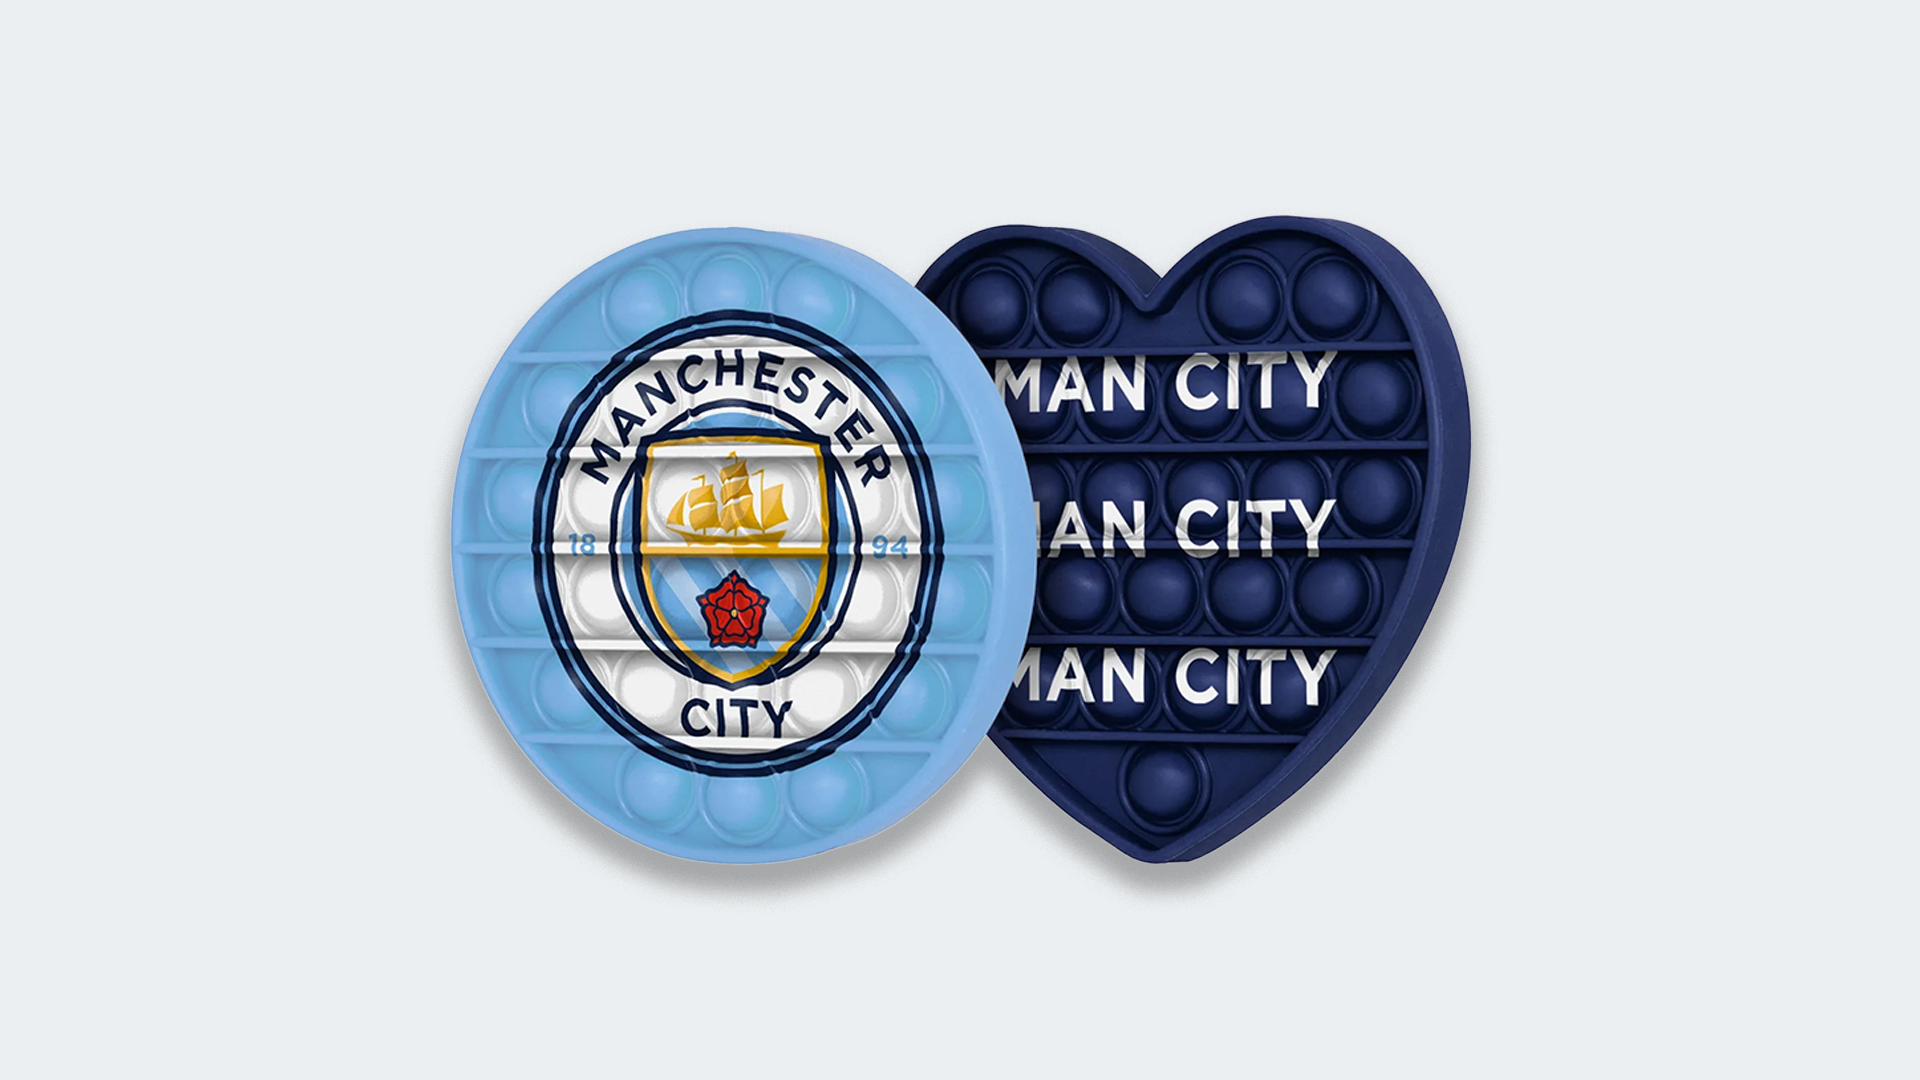 A Great Christmas Manchester City FC Official Football Gift Fleece Blanket Birthday Gift Idea For Men And Boys 